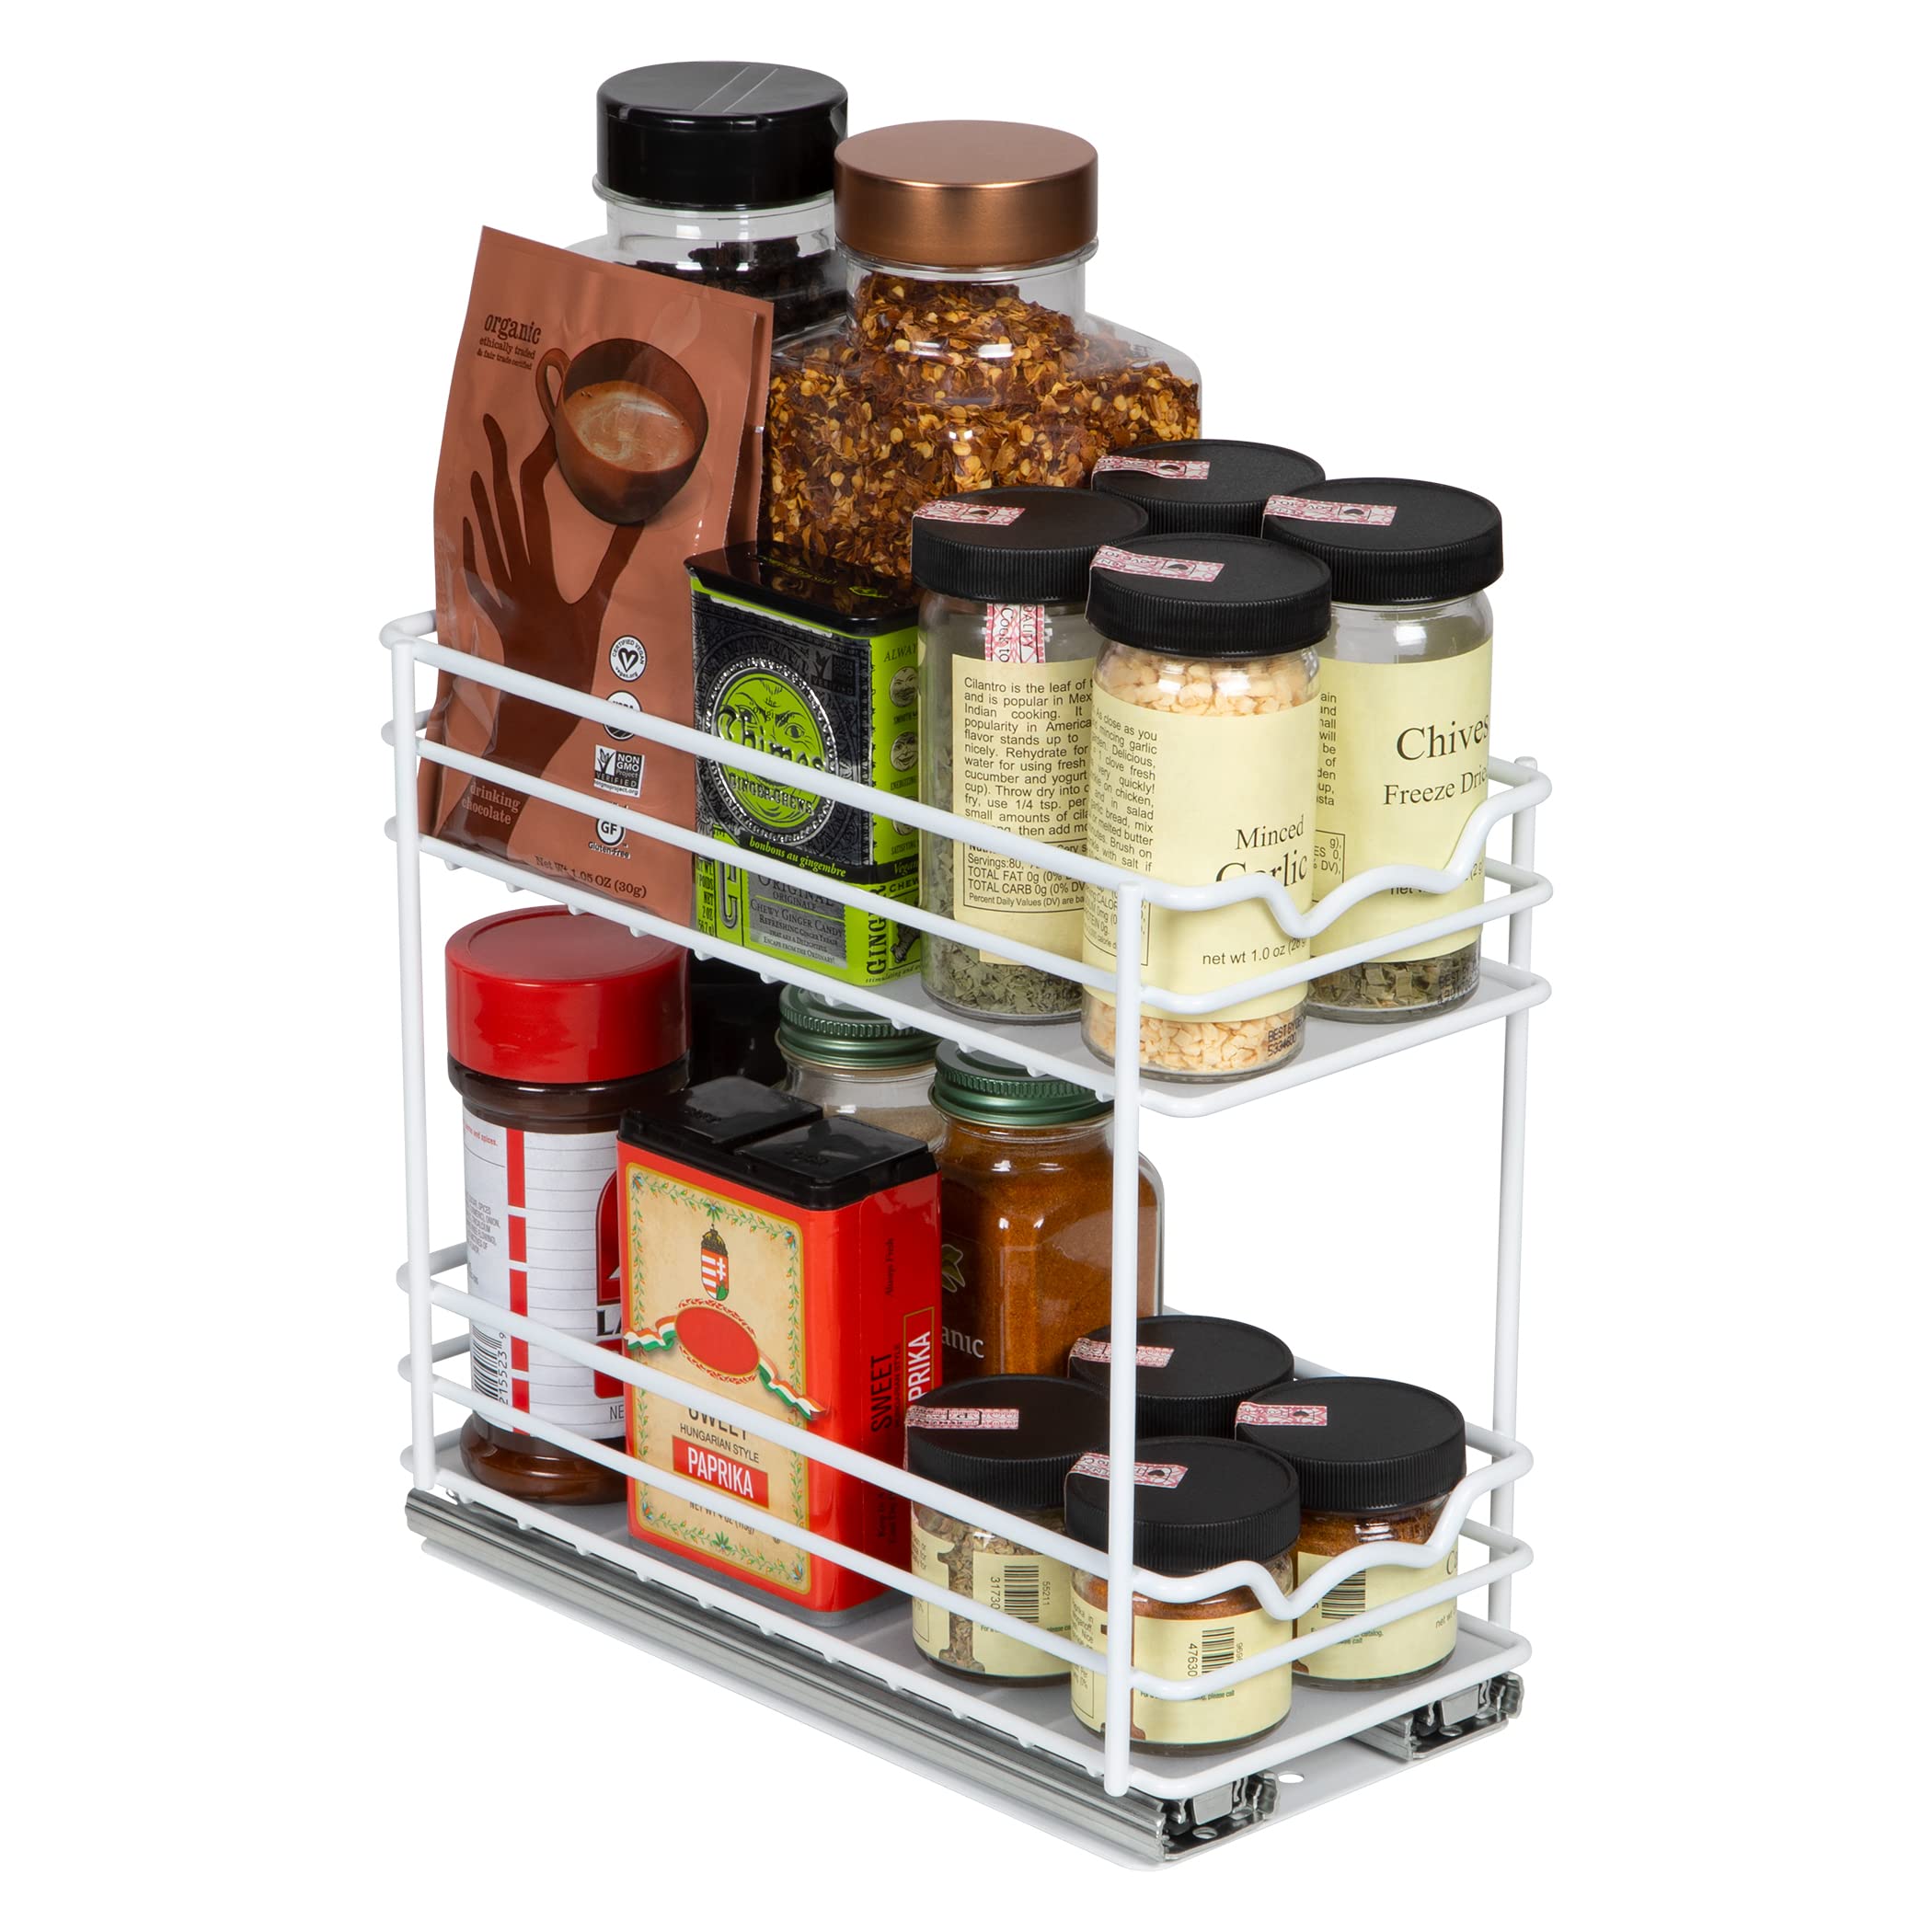 HOLDN’ STORAGE Pull Out Spice Rack Organizer for Cabinet, Heavy Duty-5 Year Limited Warranty- Slide Out Spice Rack 4.5" W -Fits Spices, Sauces, Cans etc. Requires at least 4.9” Cabinet Opening